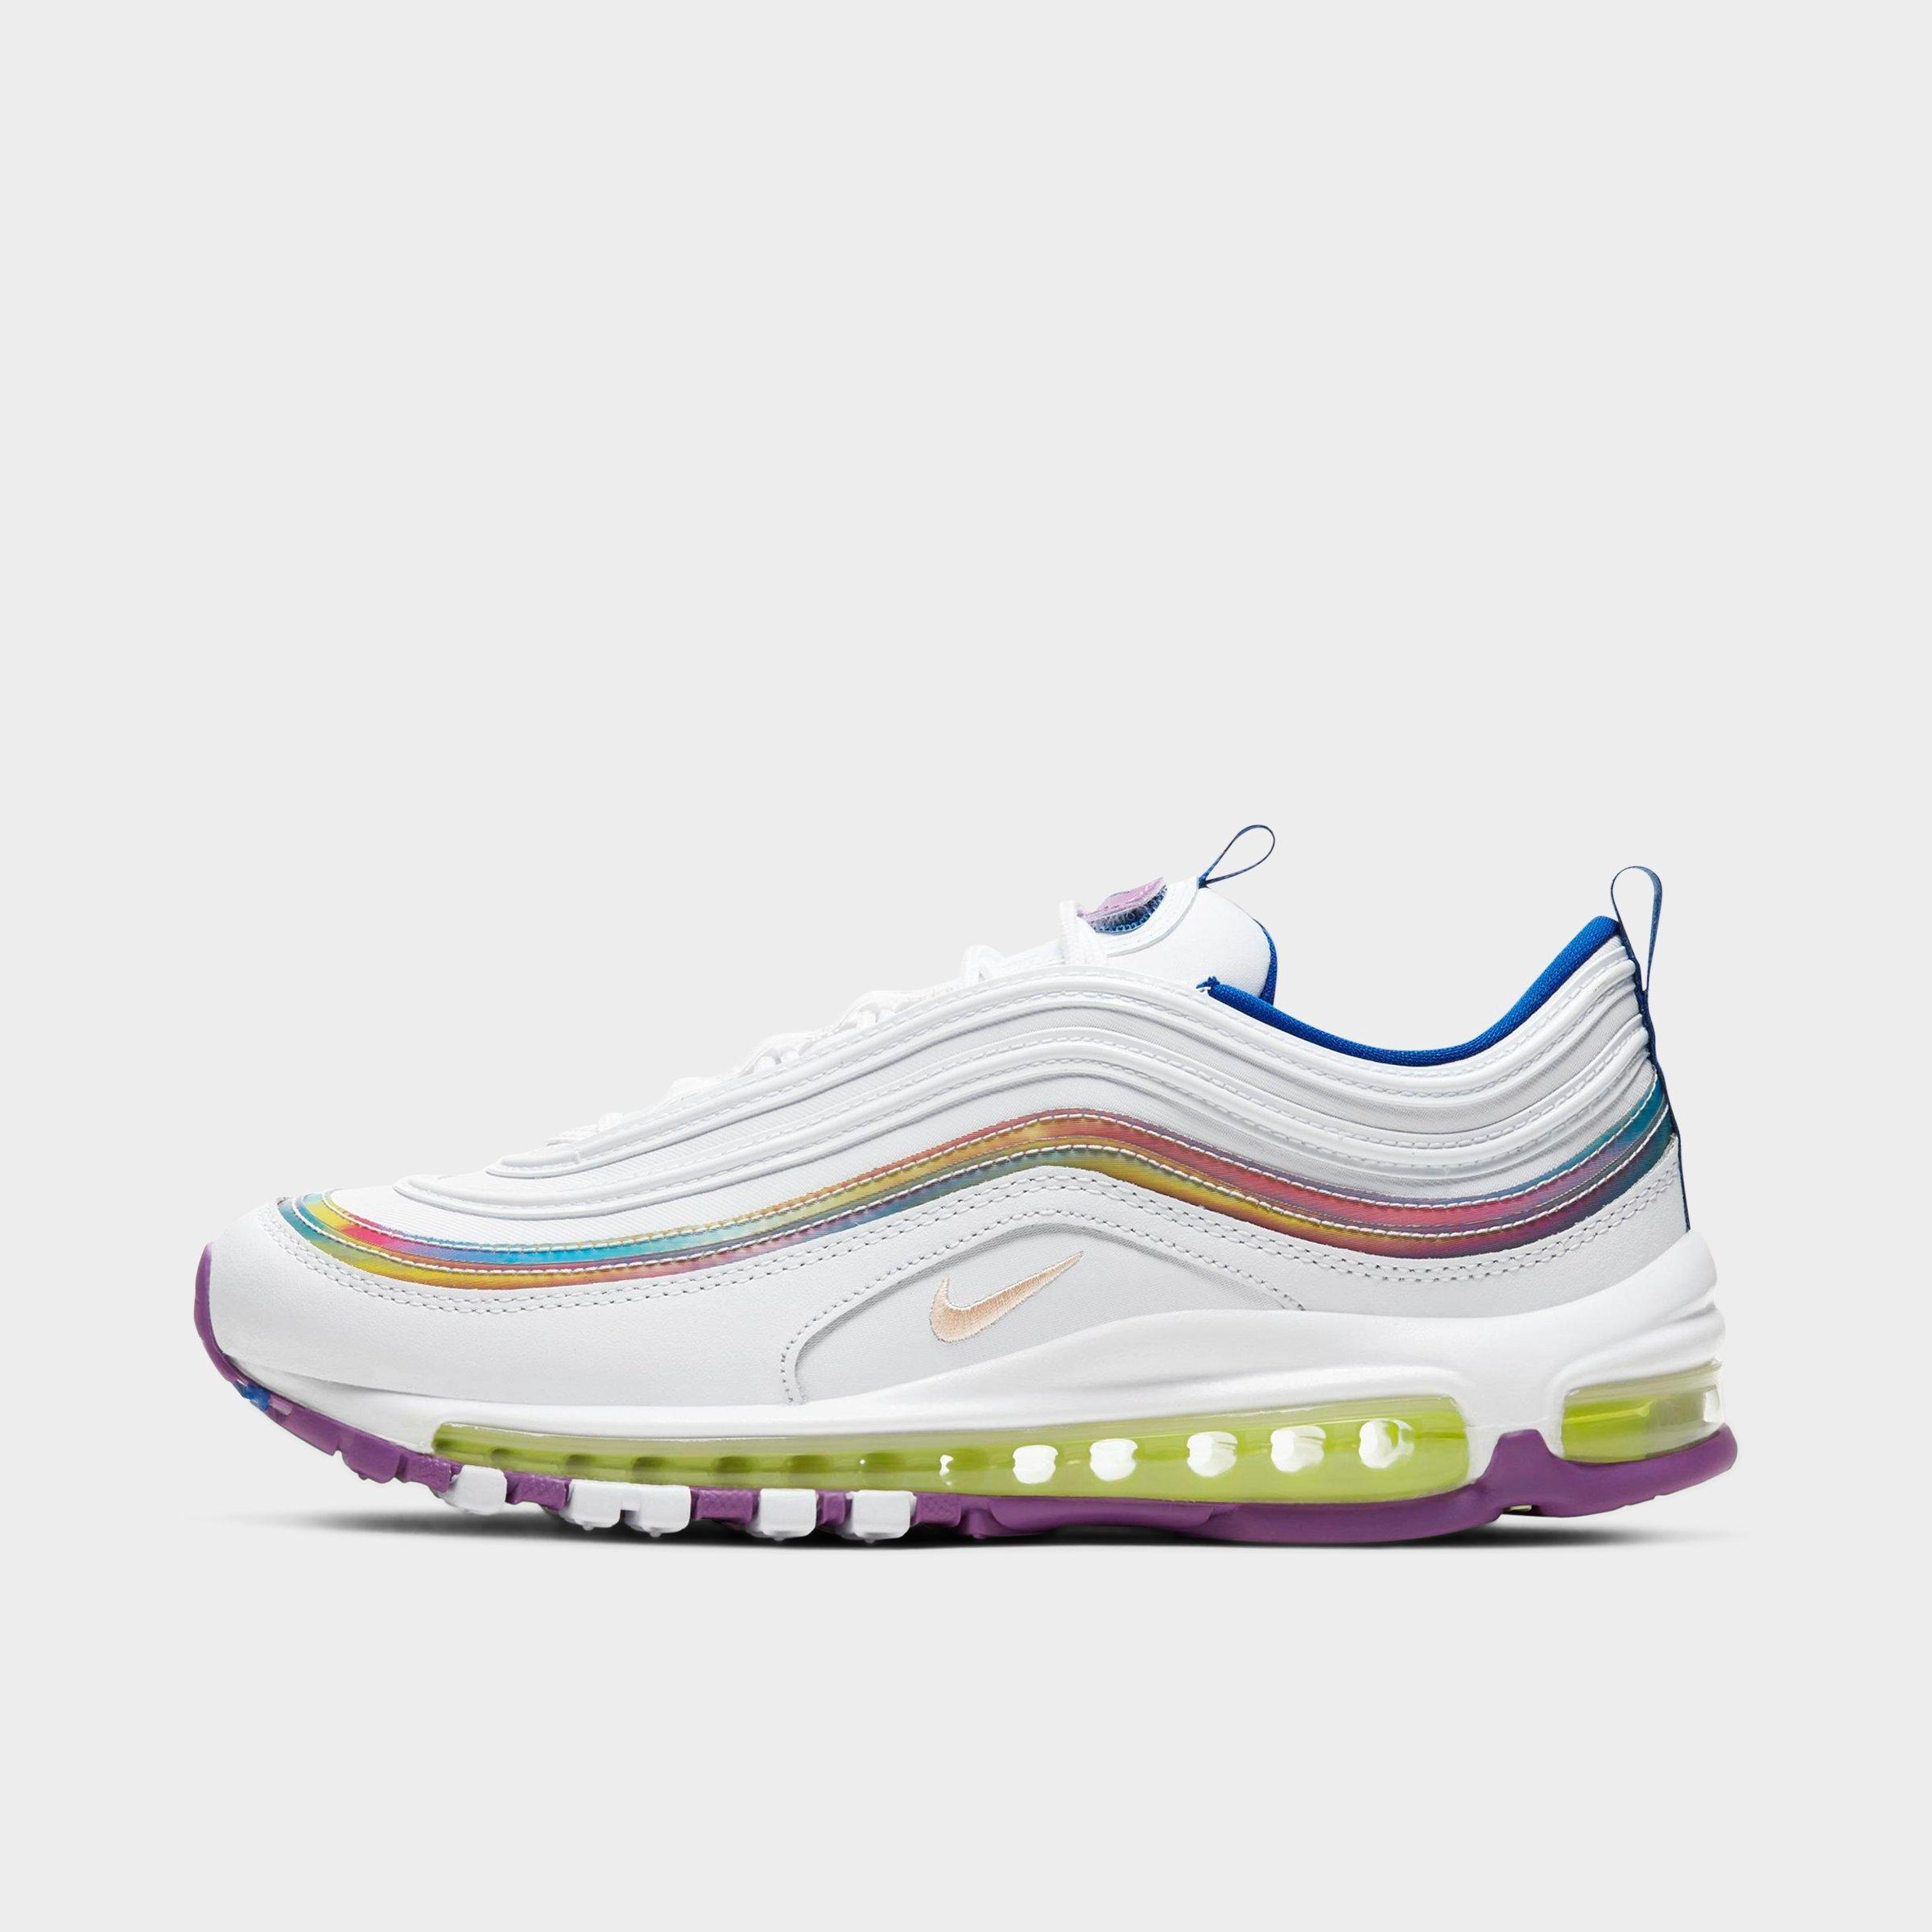 nike air max 97 we casual shoes